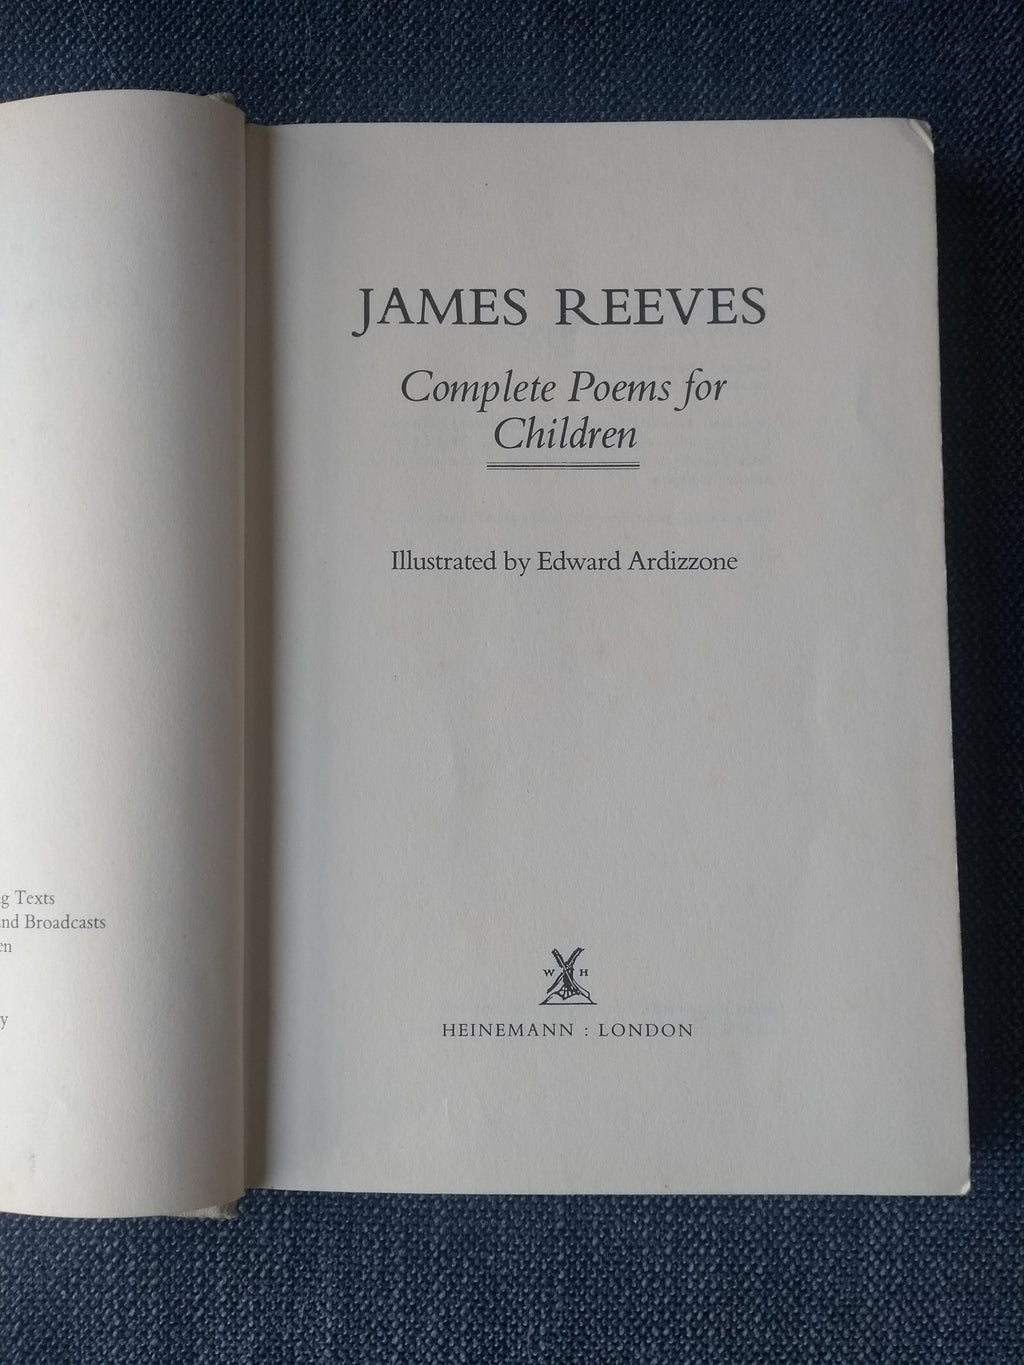 Complete Poems for Children, by James Reeves: Illustrated by Edward Ardizzone